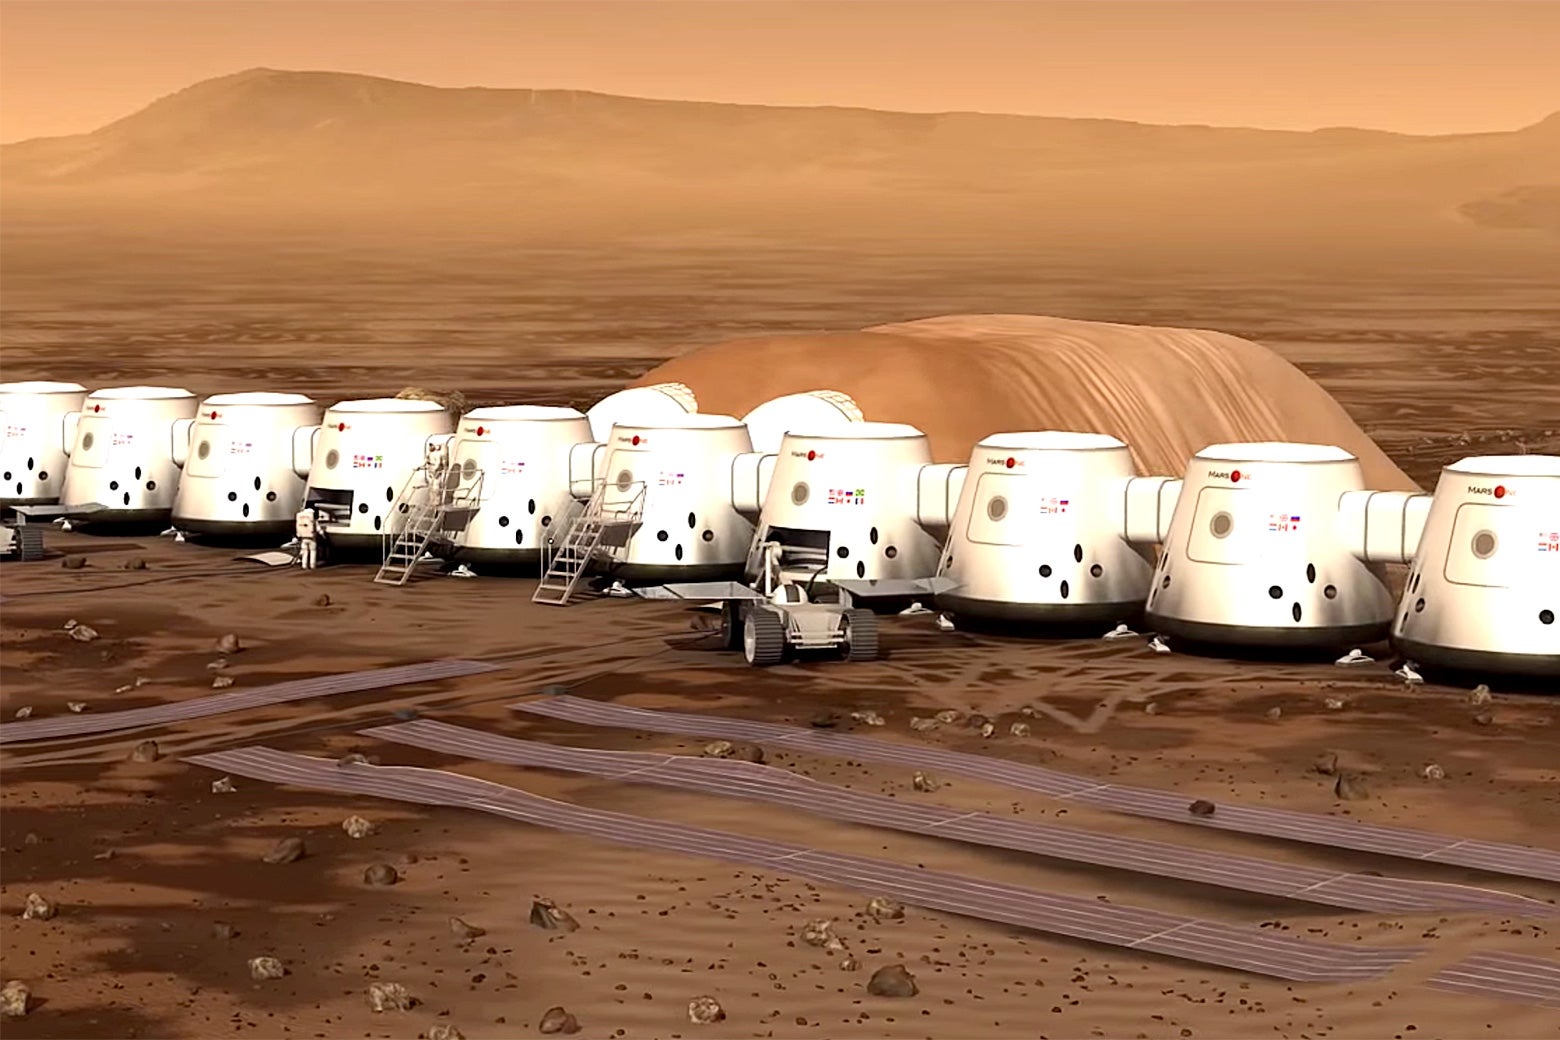 An animated concept of Mars One's future settlement on Mars.